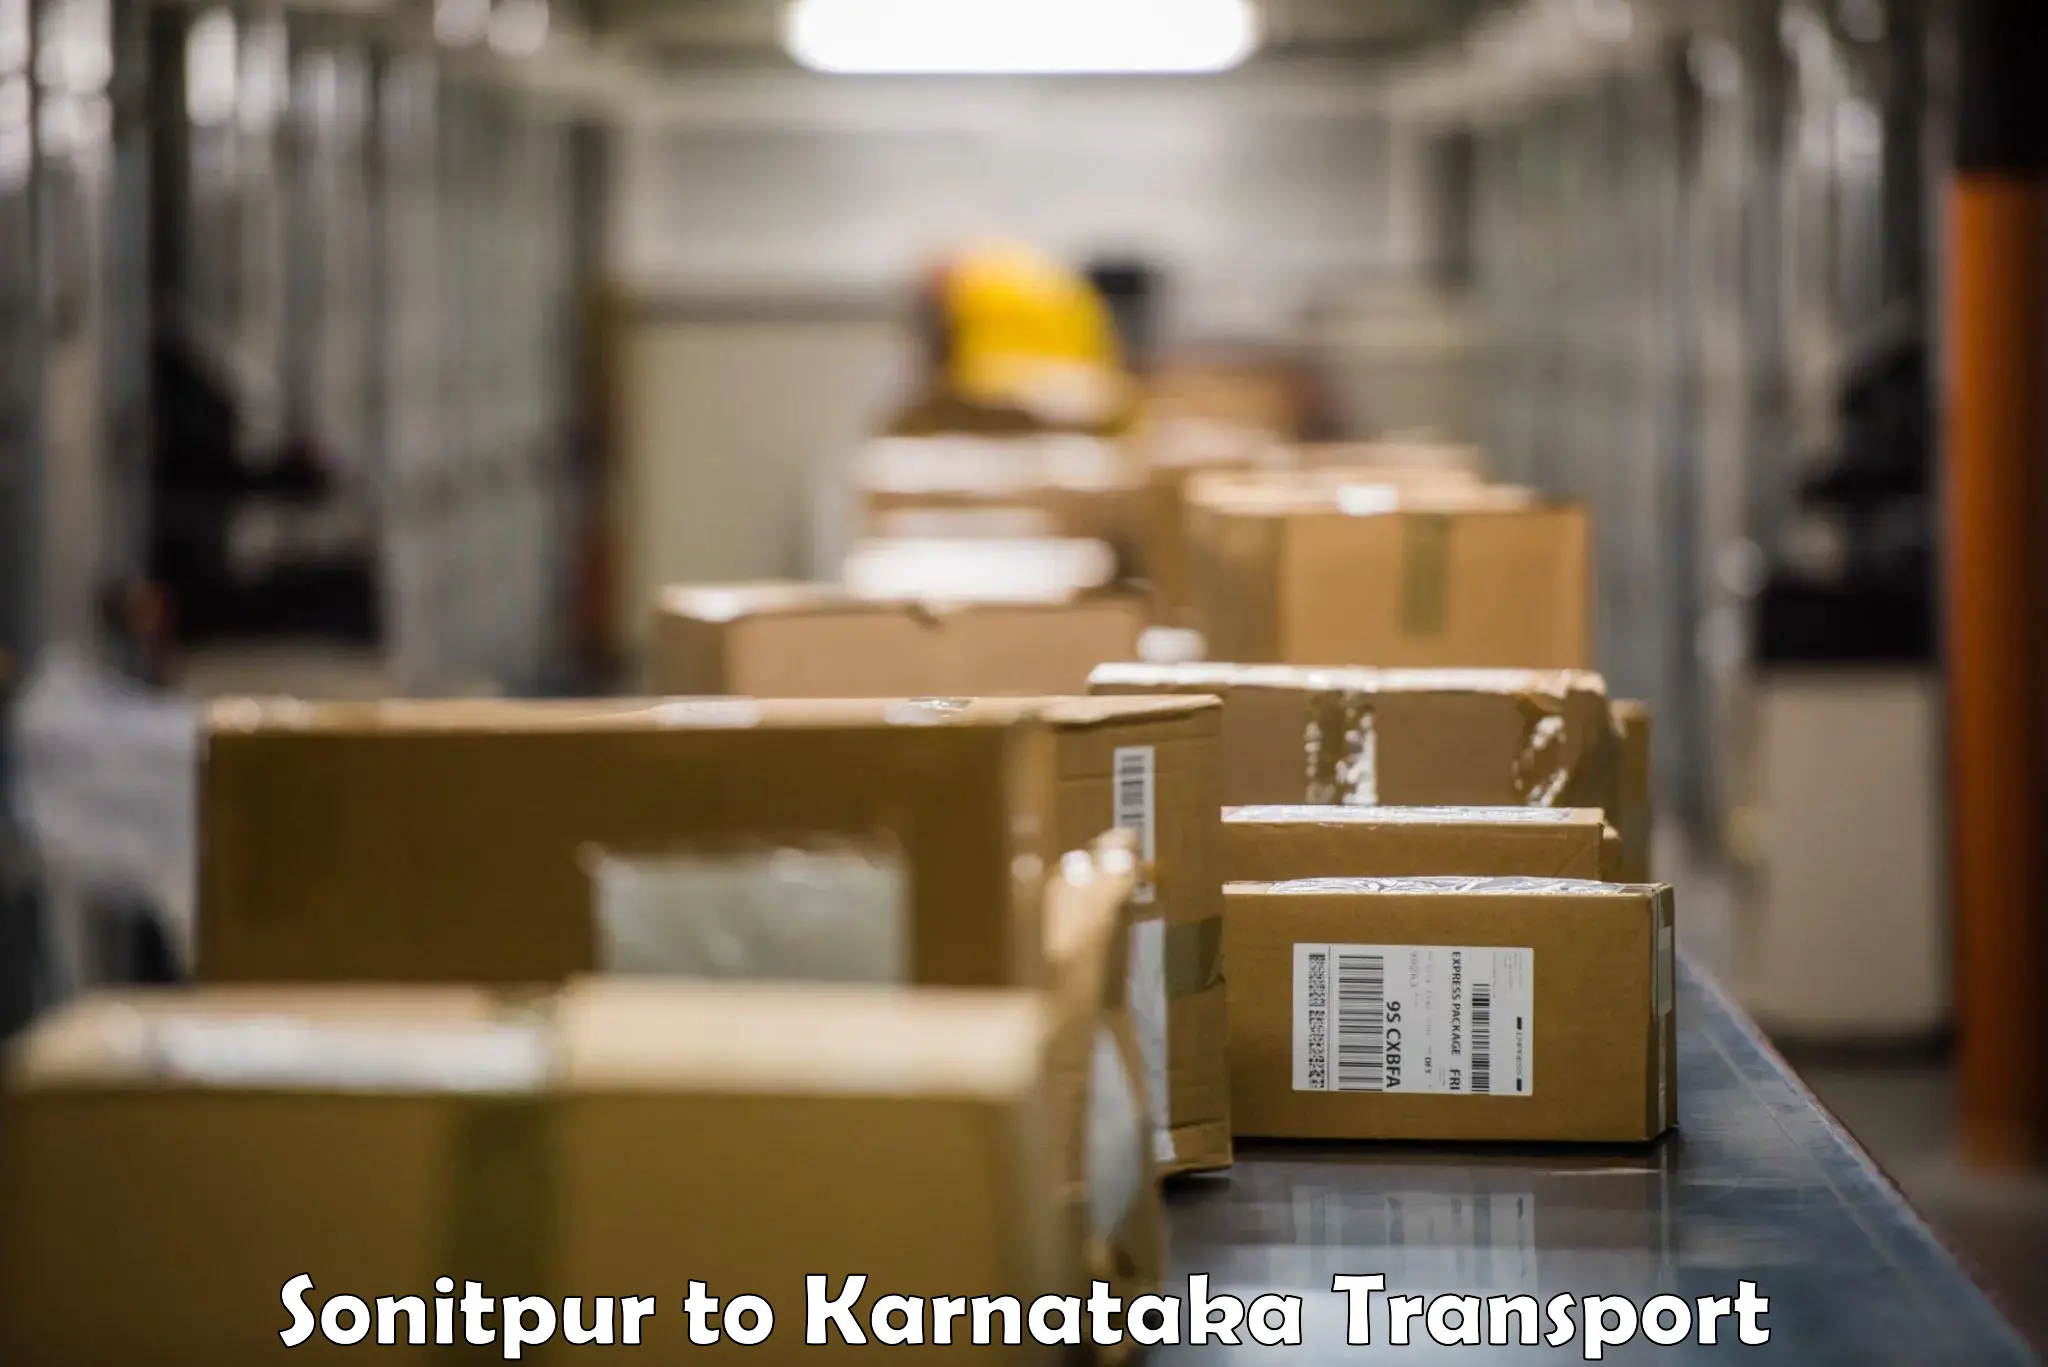 Container transport service Sonitpur to Devanahalli